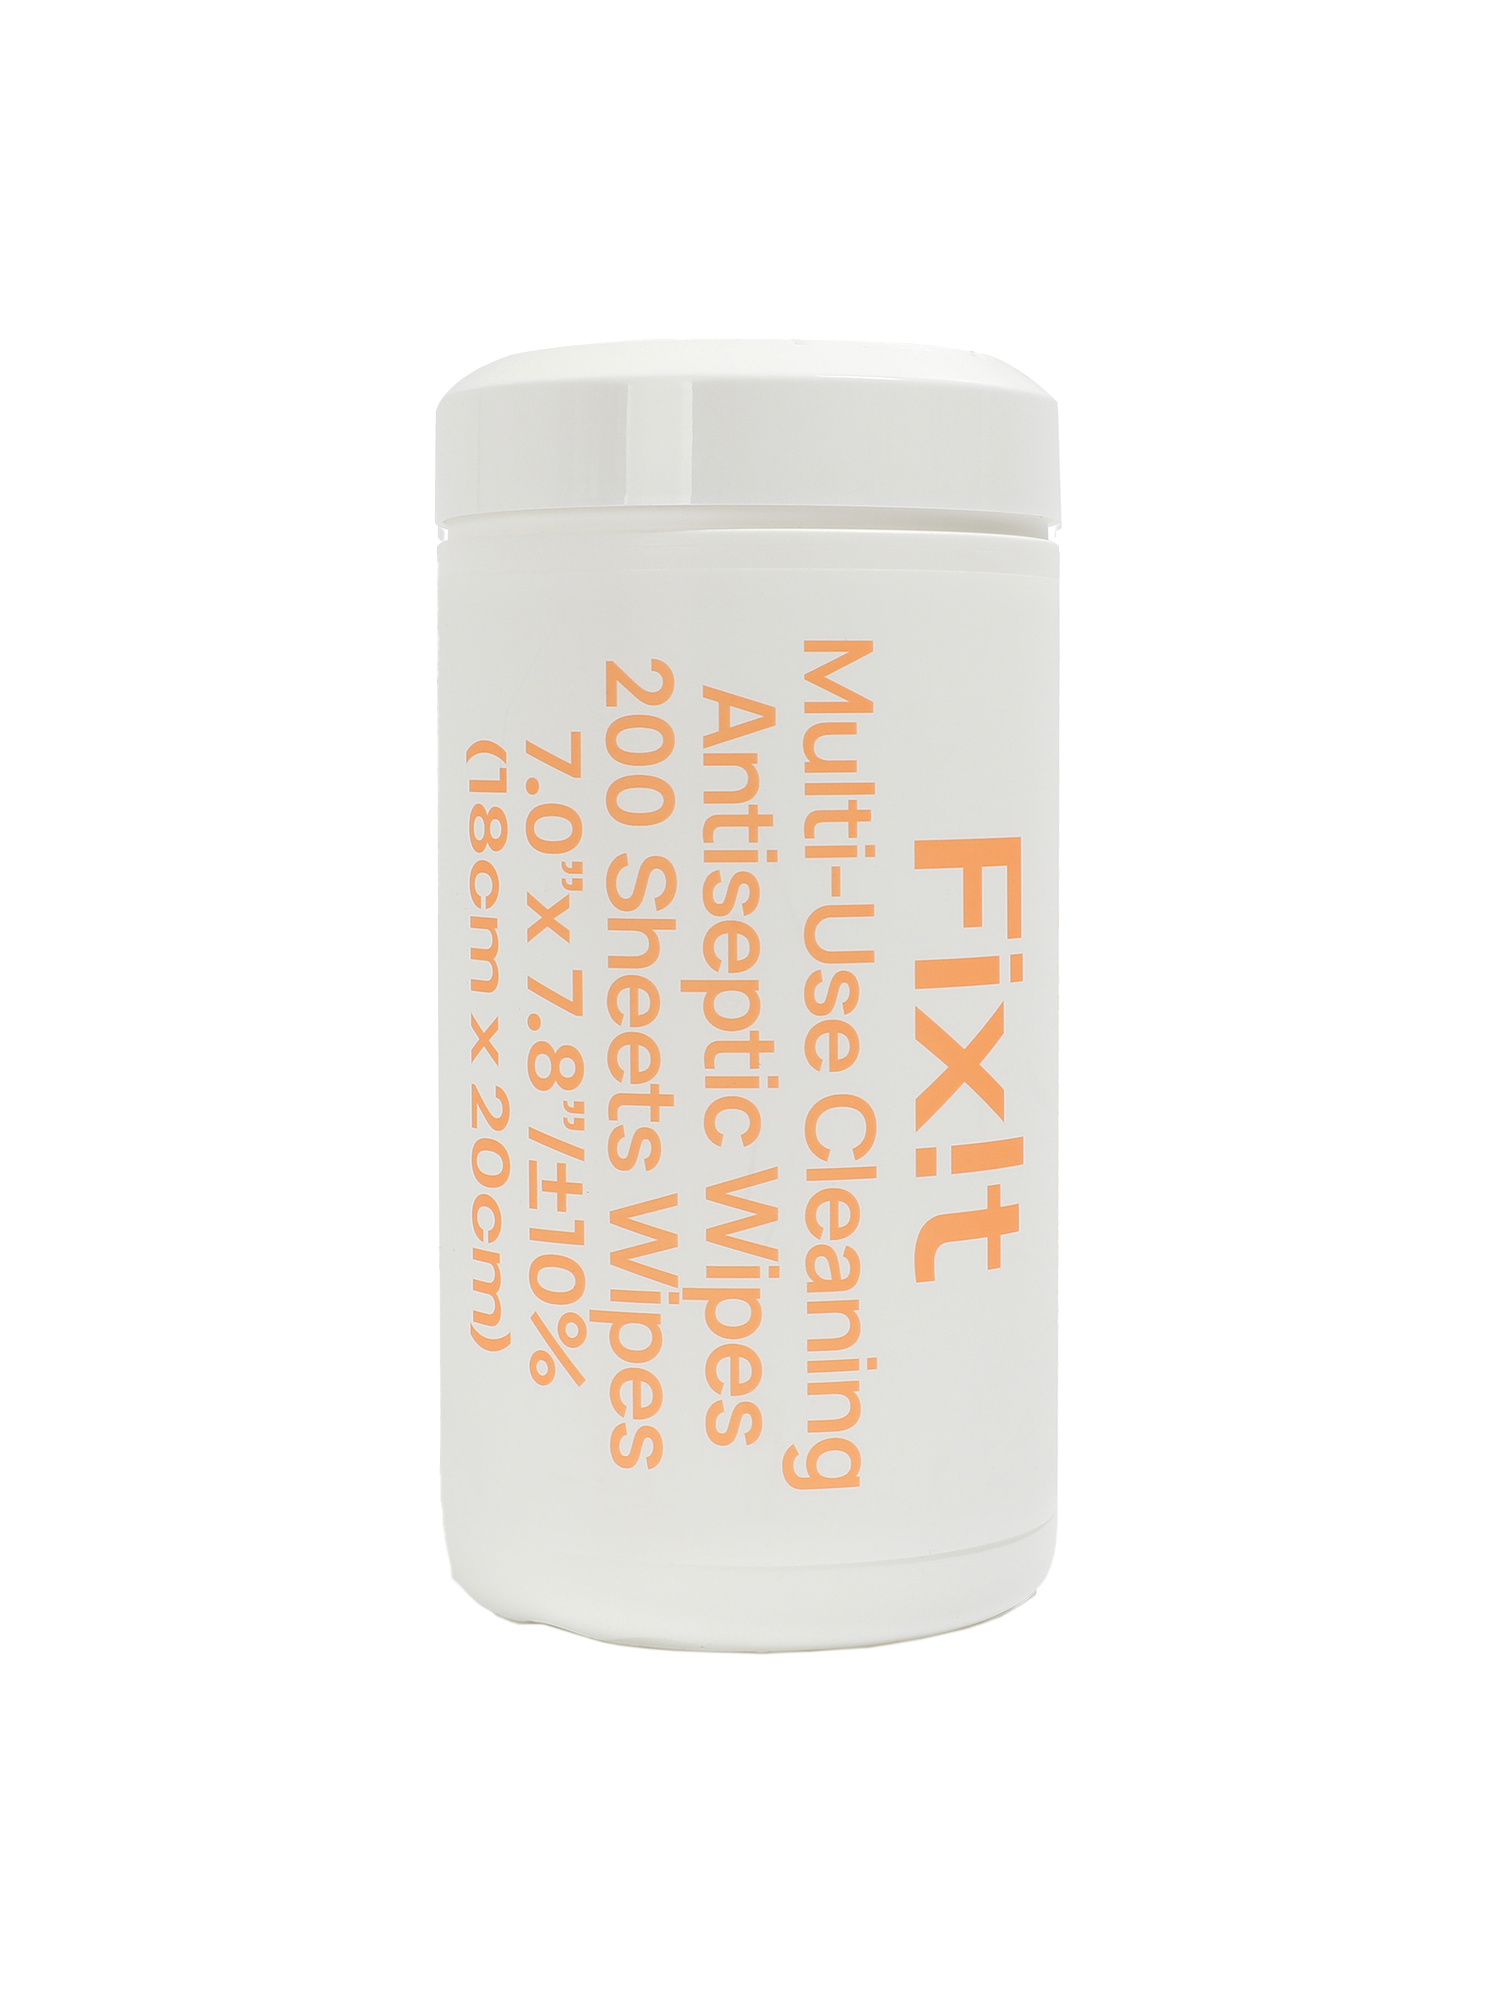 Fix!t Multi-Use Cleaning Antiseptic Wipes